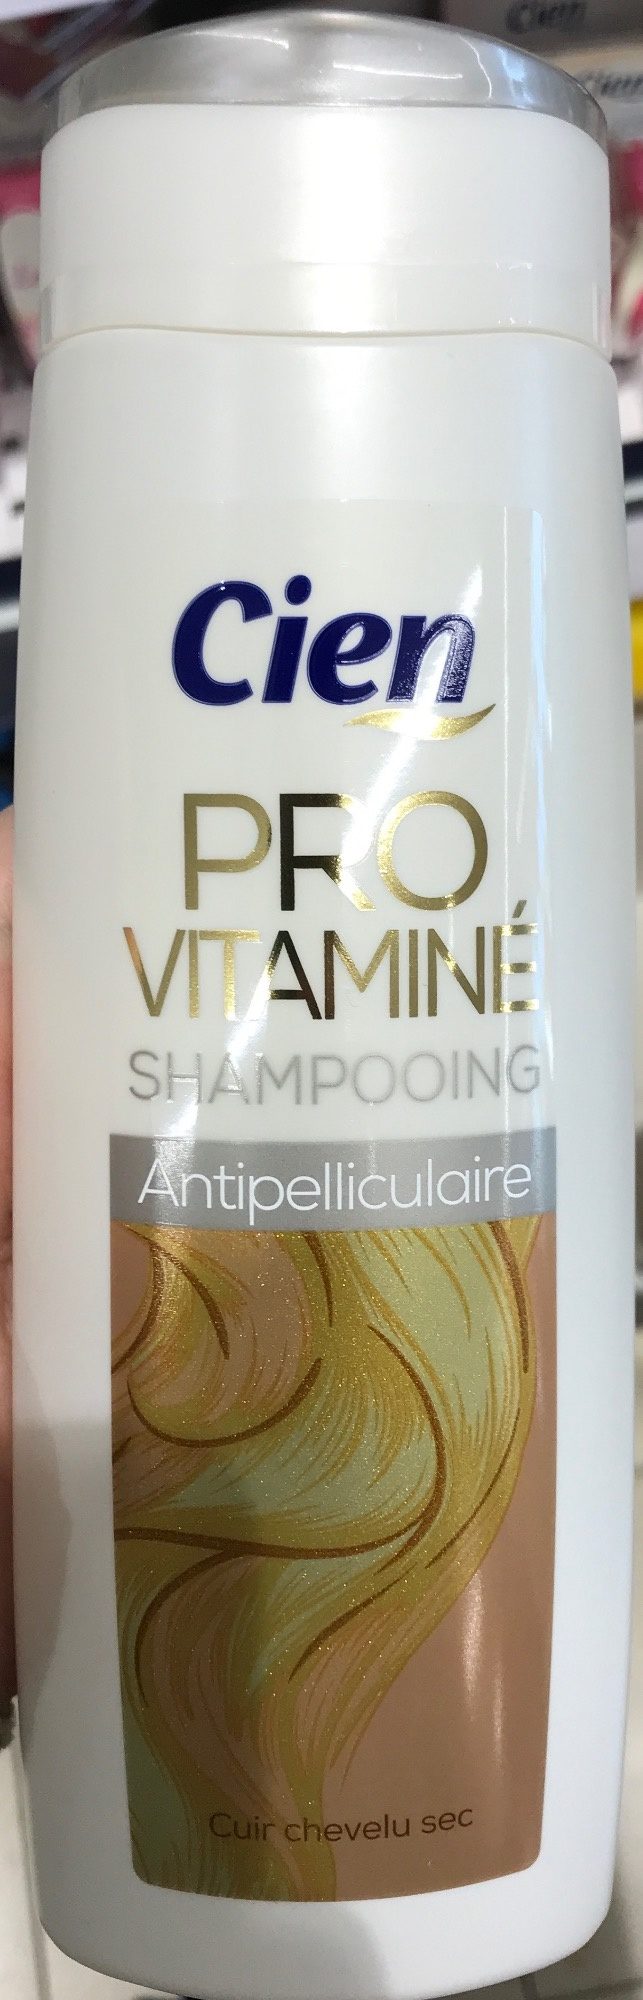 Provitaminé Shampooing Antipelliculaire - Product - fr